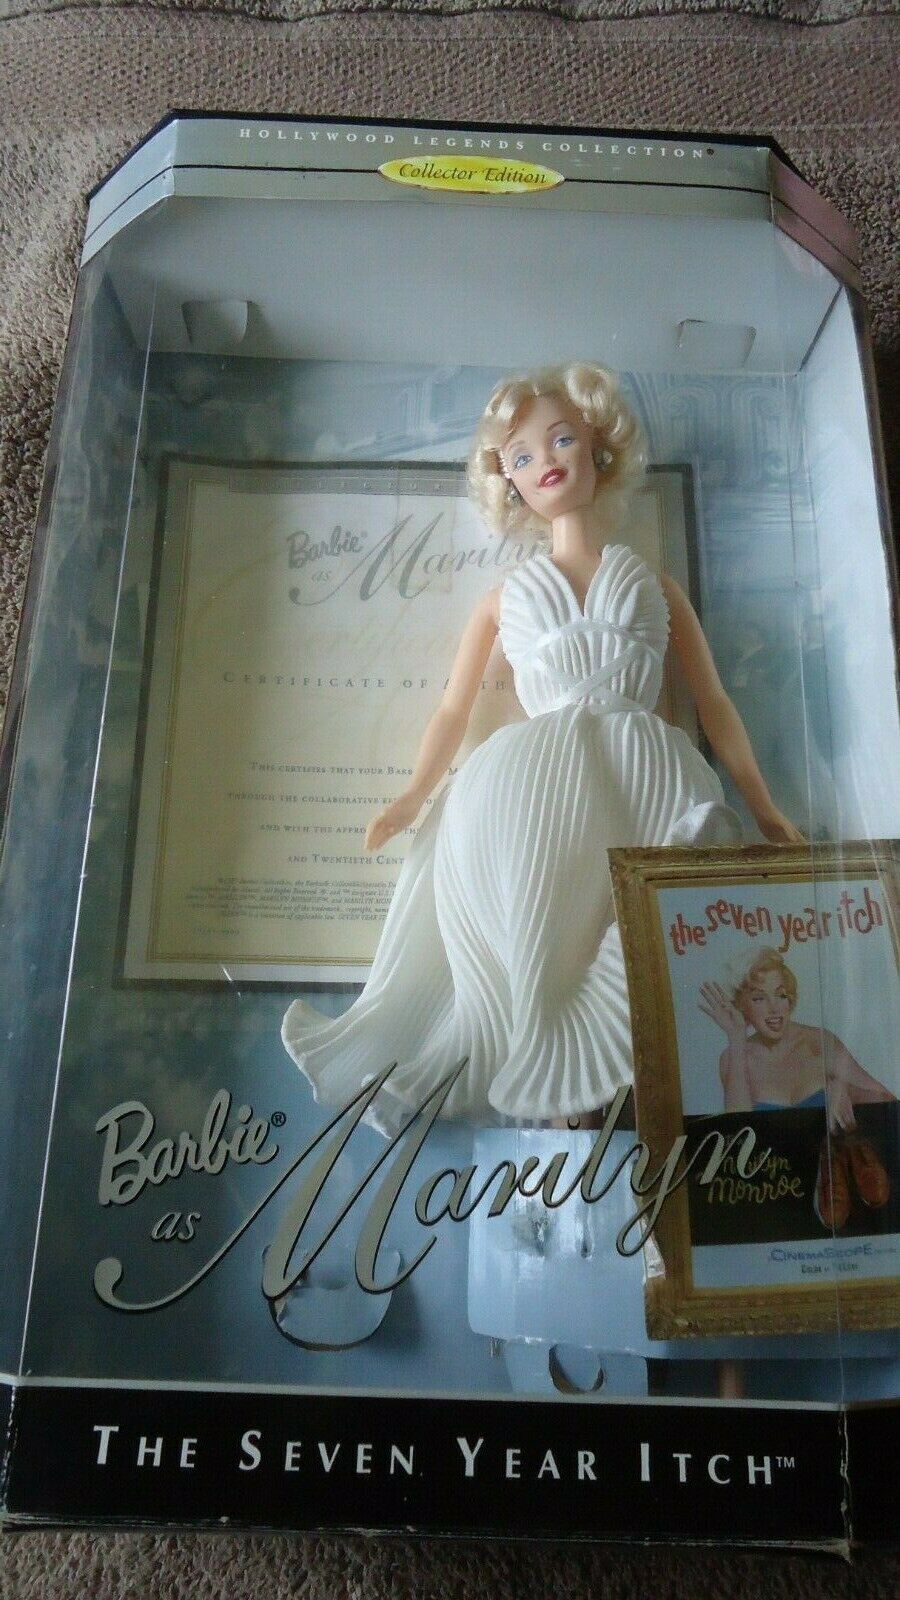 Barbie - Marilyn Monroe Doll - 7 Year Itch - Hollywood Legend's Collection